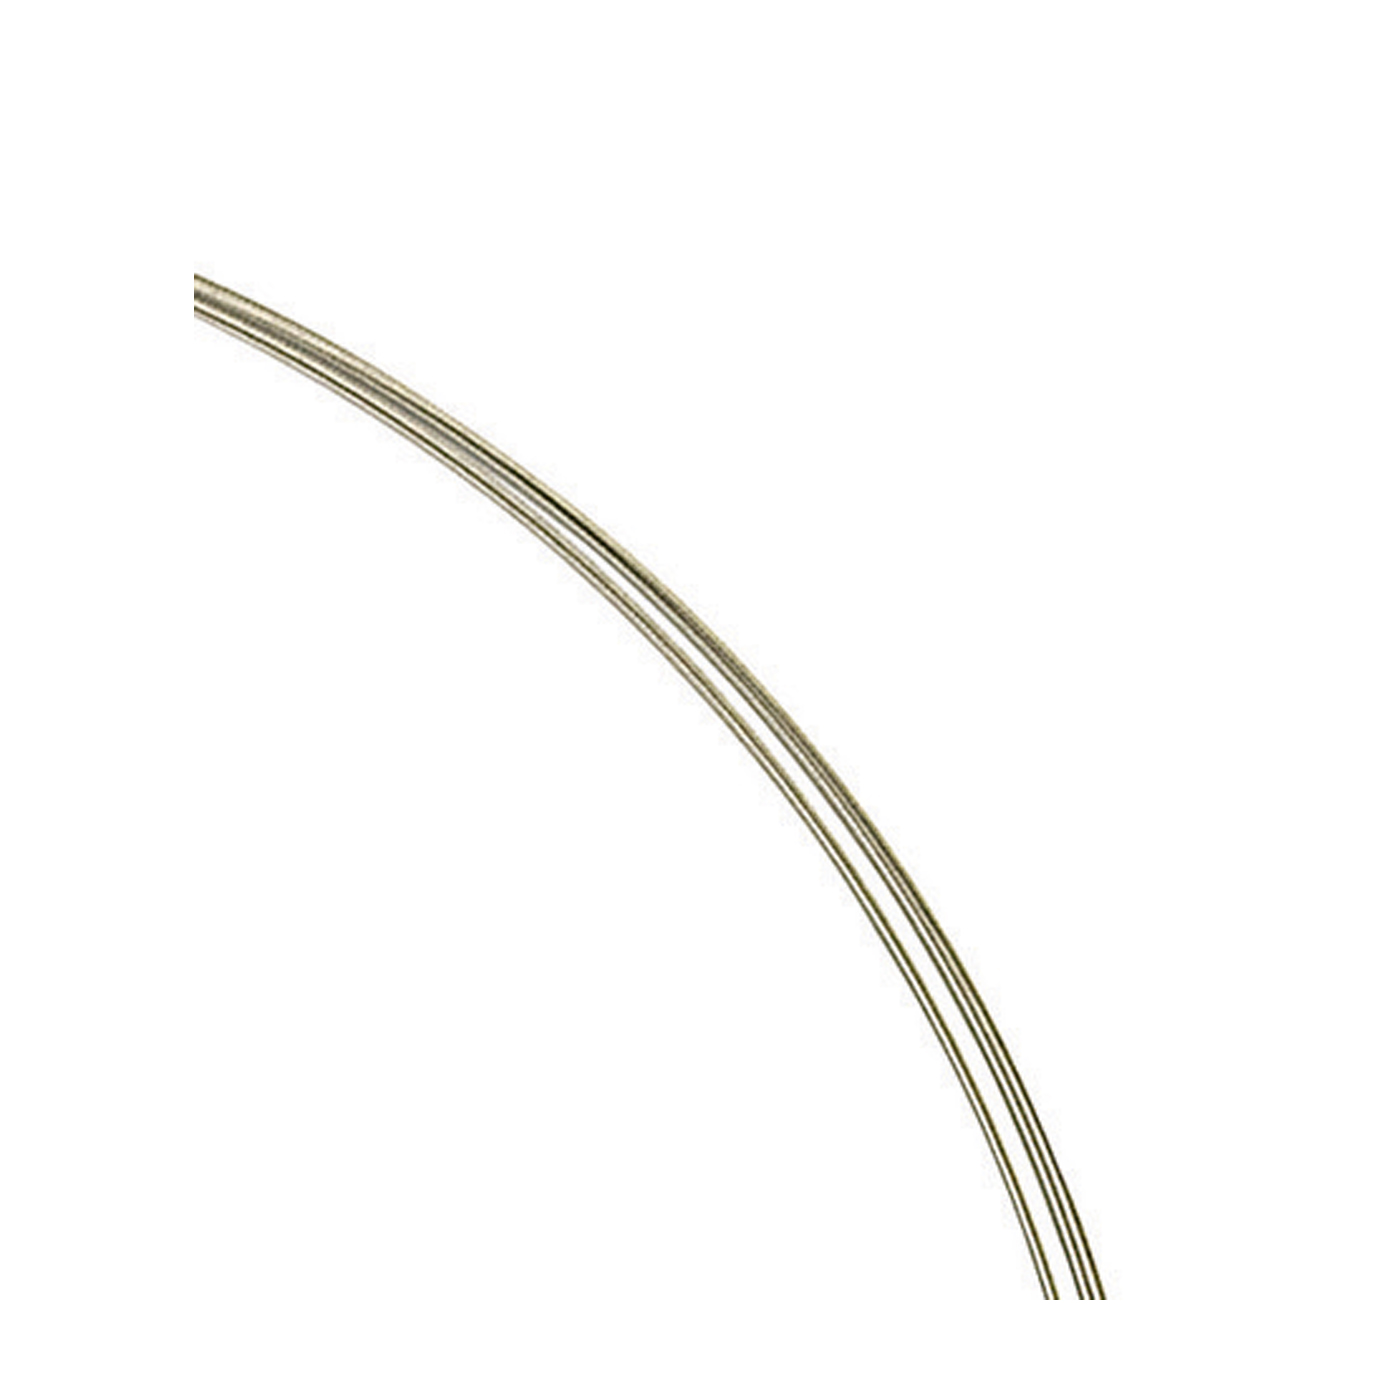 Steel Cable Neck Wire, 5-Strand, ø 0.3 mm, 42 cm - 1 piece